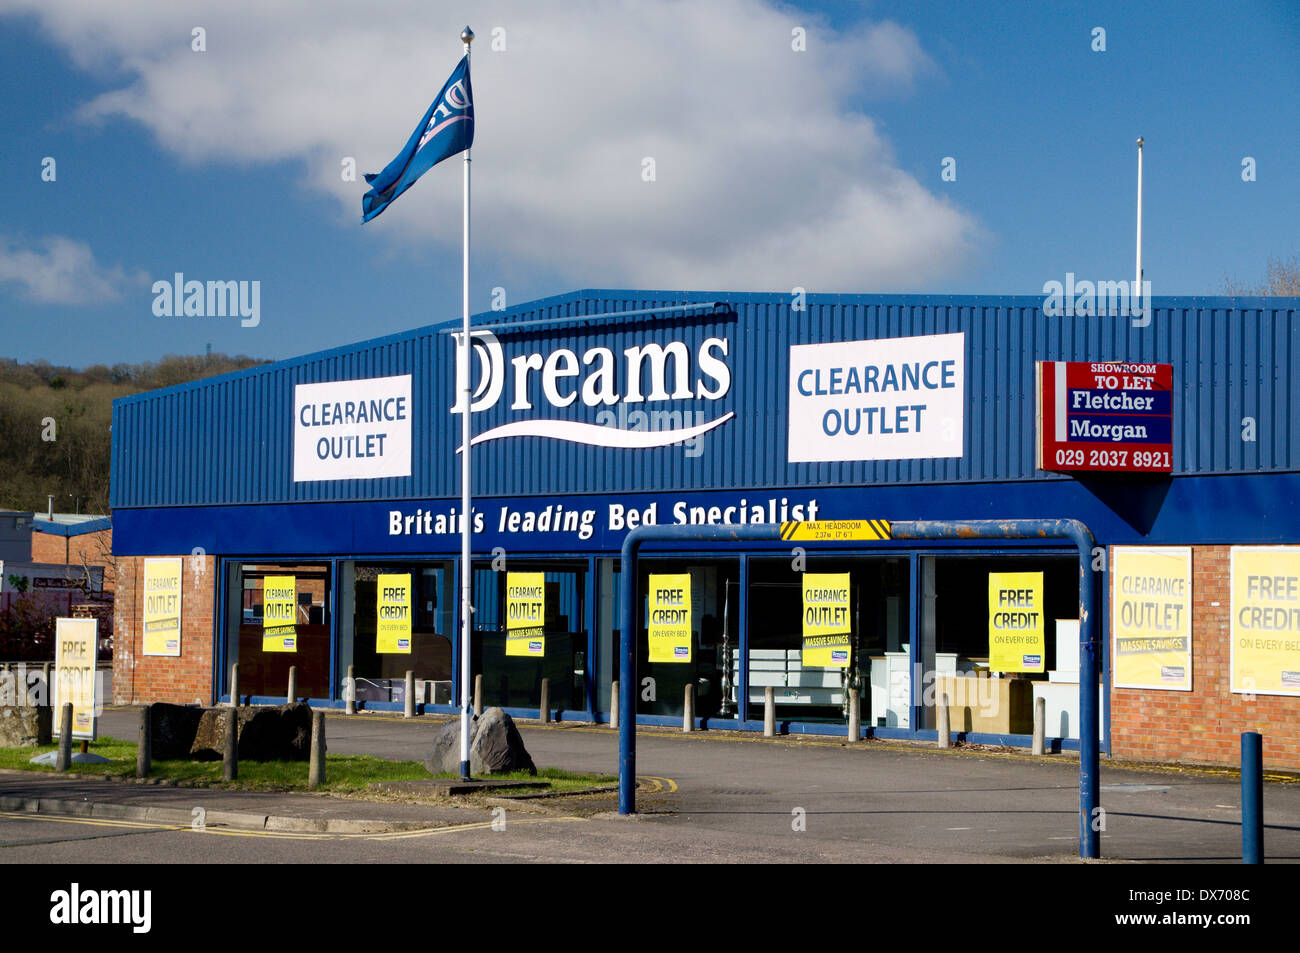 Dreams Bed showrooms, Penarth Road, Cardiff, Wales. Stock Photo